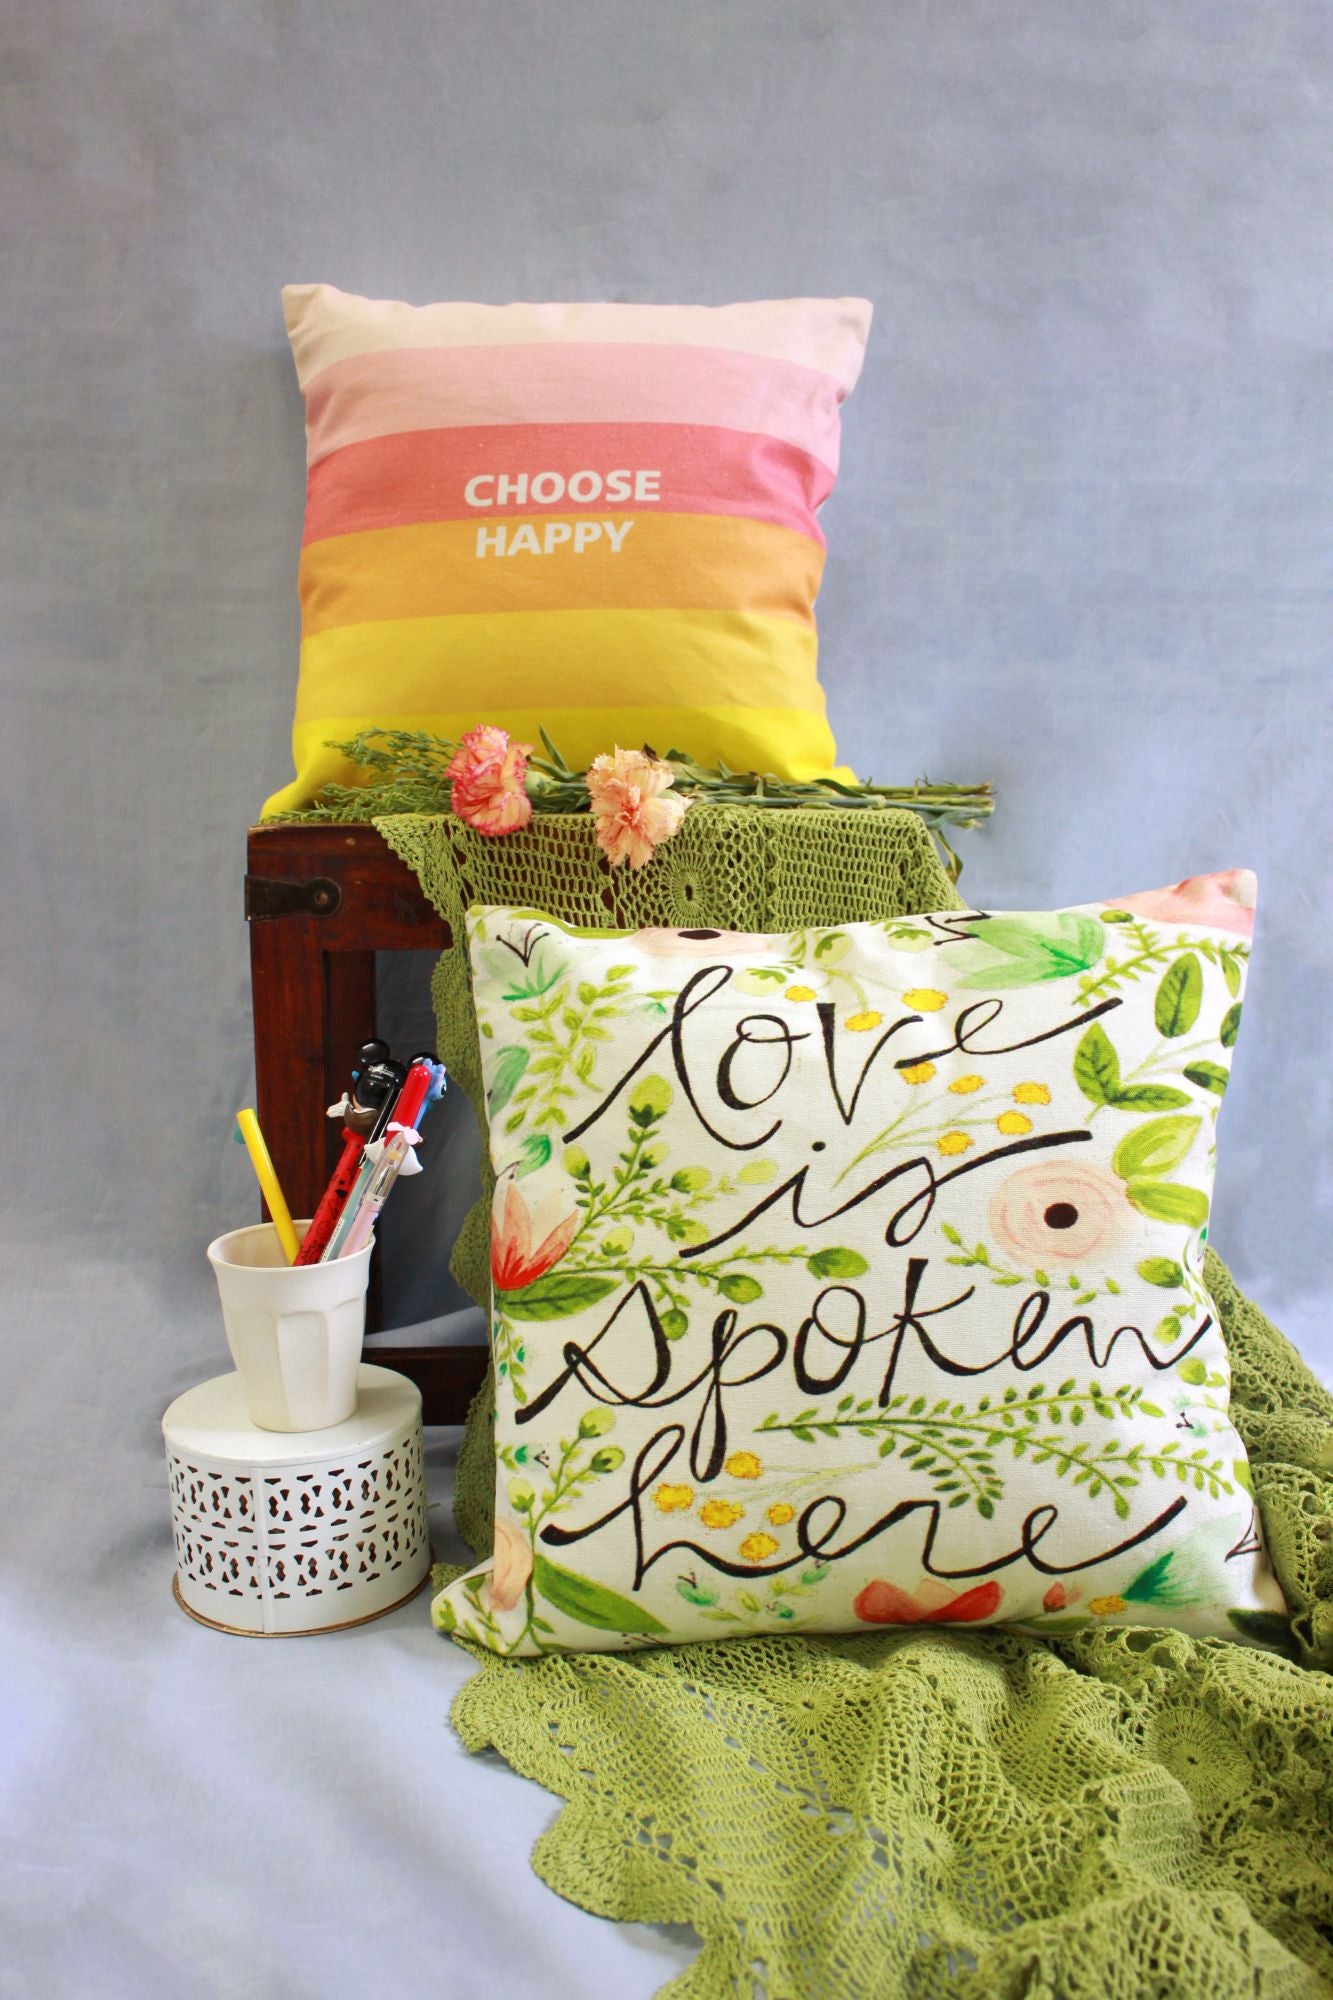 Happy Love 16 Cushions Covers (Set of 2)